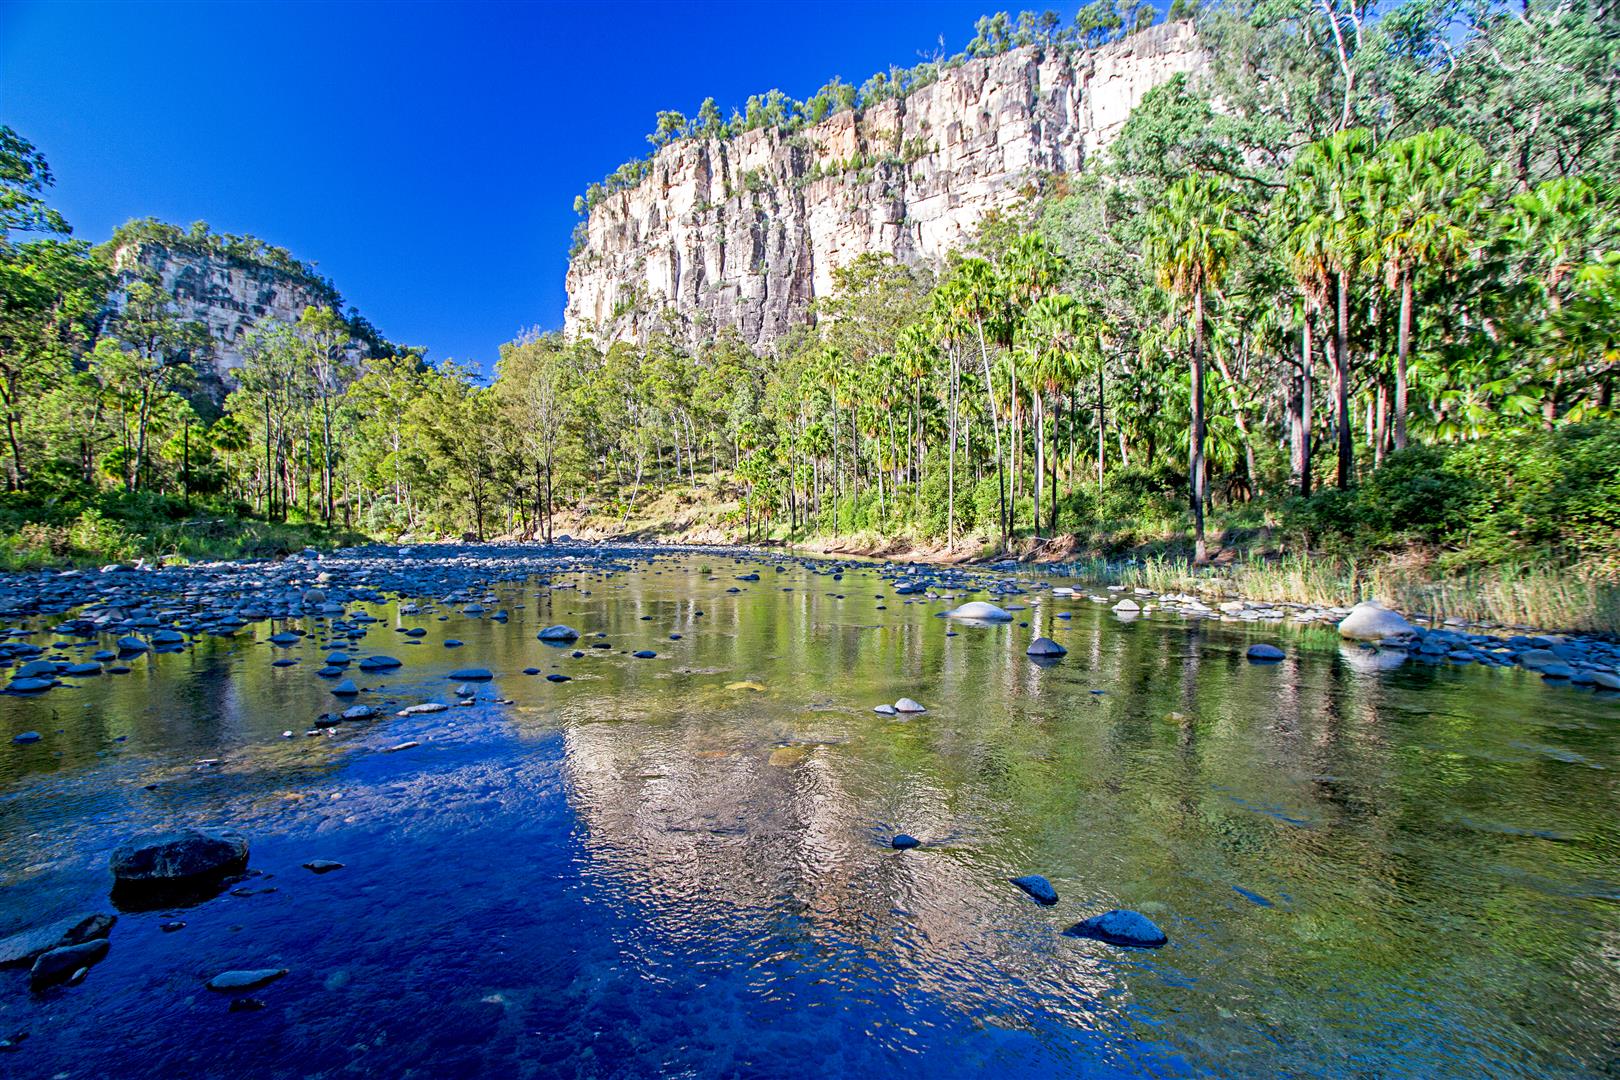 Carnarvon Gorge lies within the spectacular and rugged ranges of Queensland's central highlands. Lined with vegetation and fed by the waters of numerous side gorges, Carnarvon Creek winds between towering sandstone cliffs. The gorge is a cool and moist oasis within the dry environment of central Queensland.